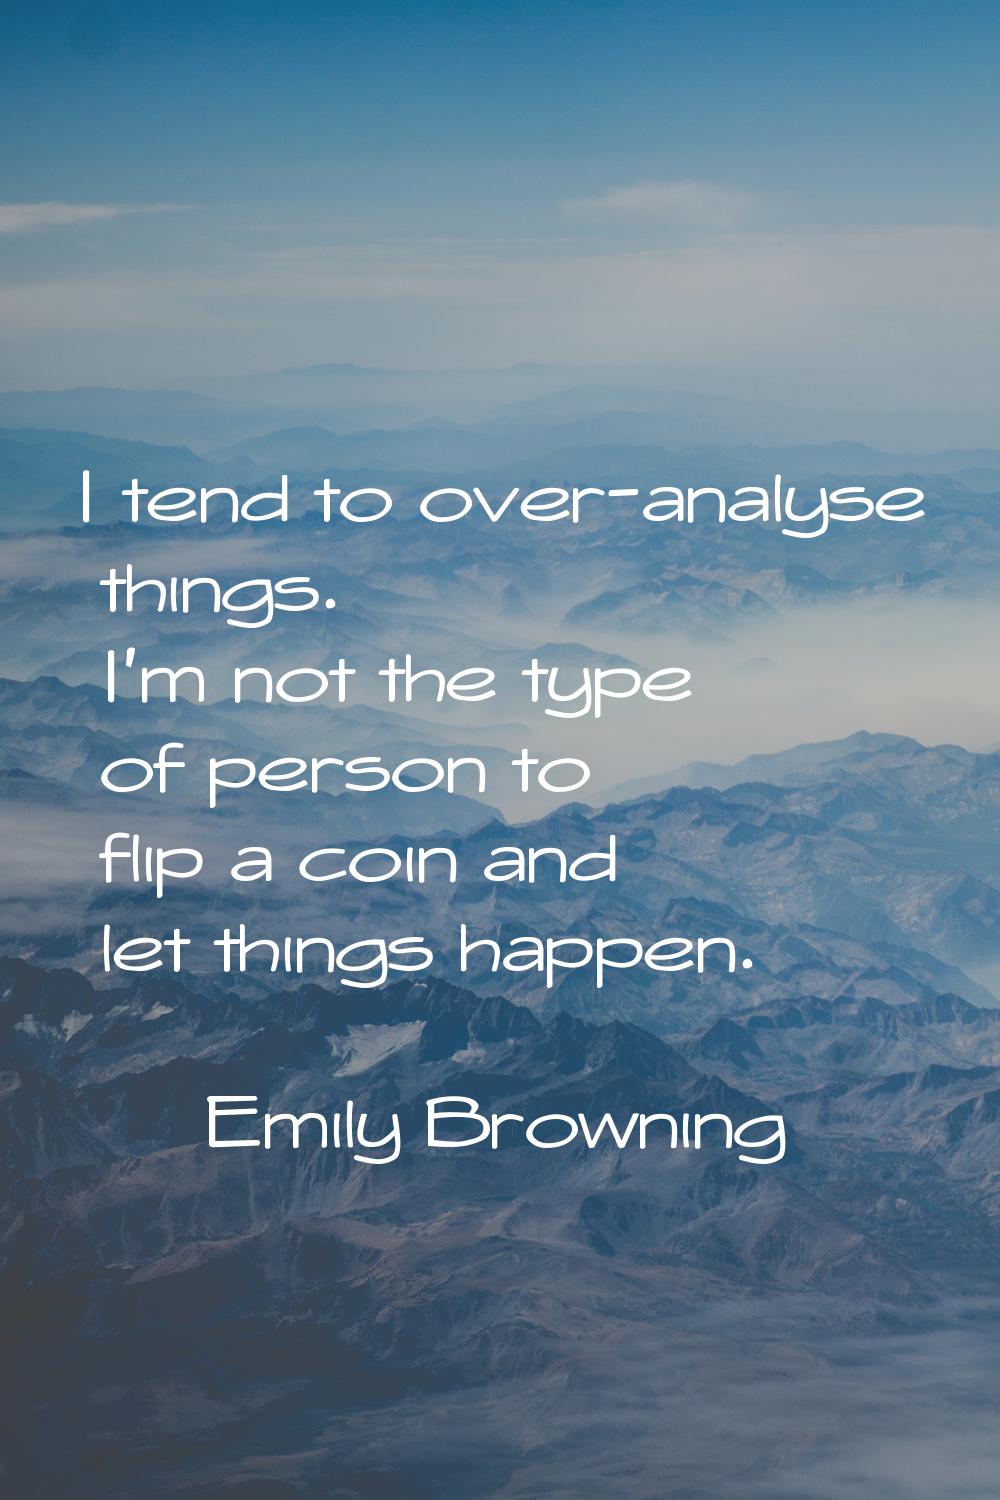 I tend to over-analyse things. I'm not the type of person to flip a coin and let things happen.